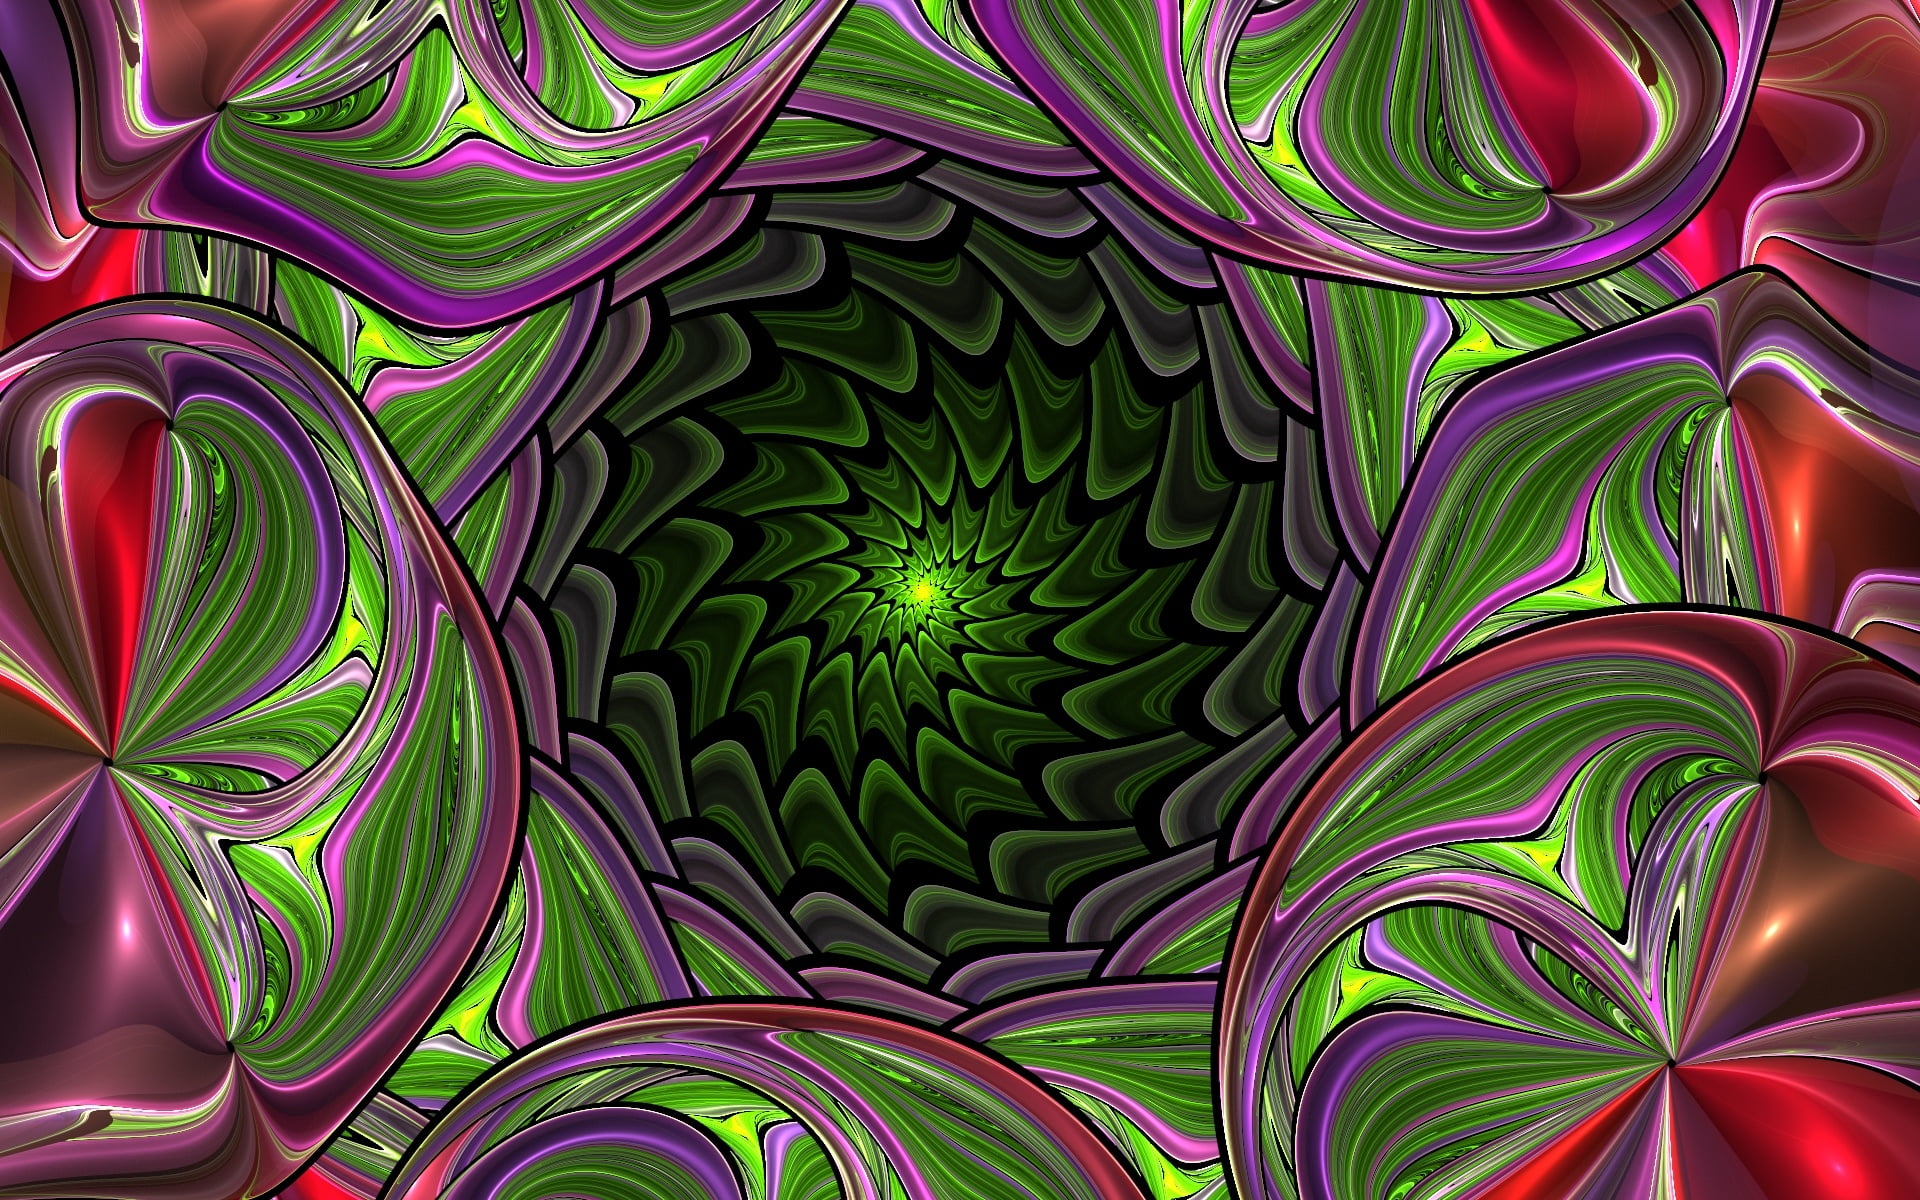 green and red abstract artwork